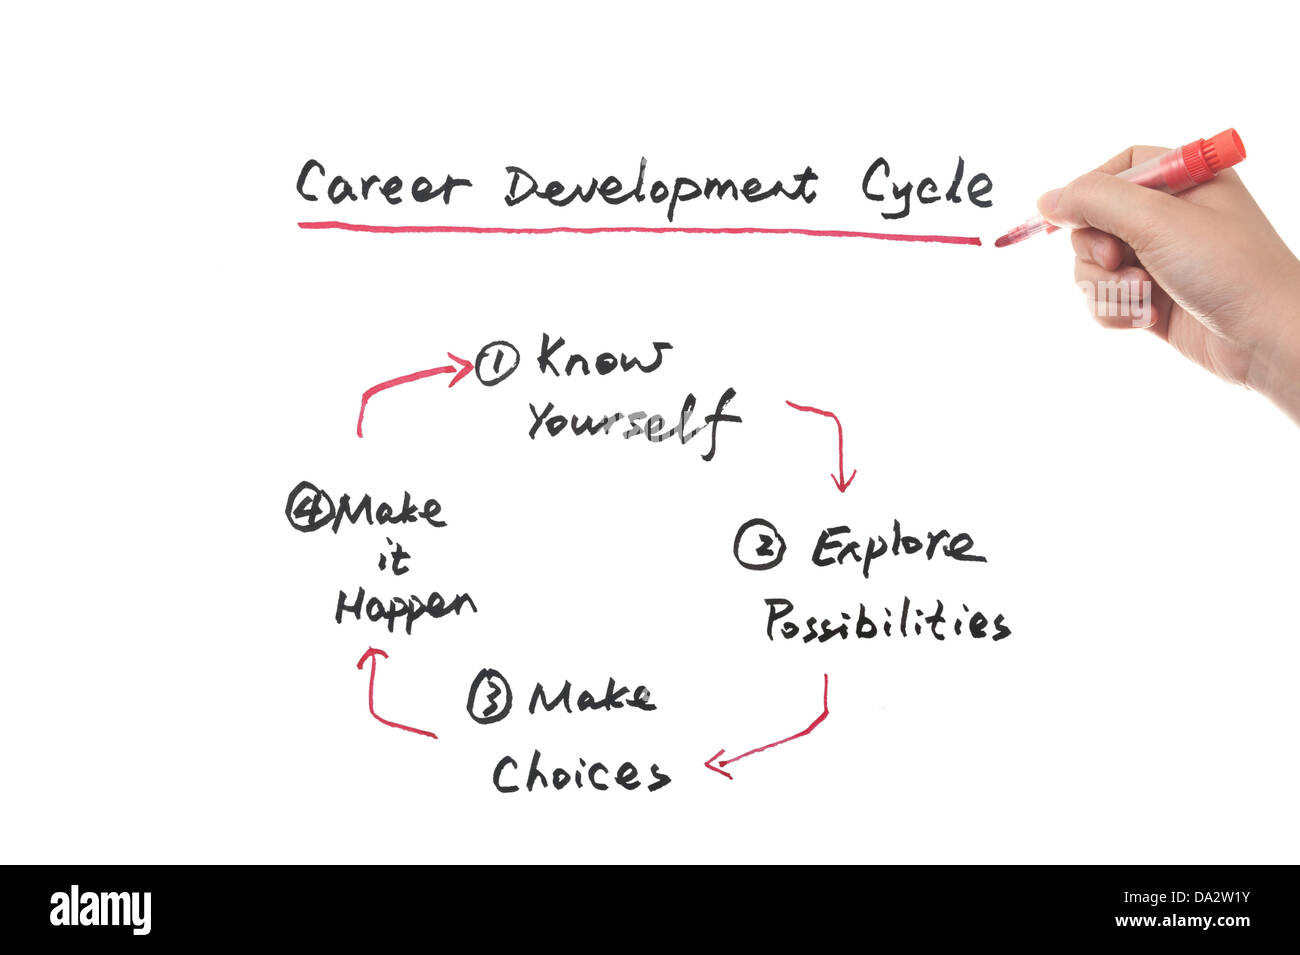 Career development cycle concept diagram drawn on white board Stock Photo